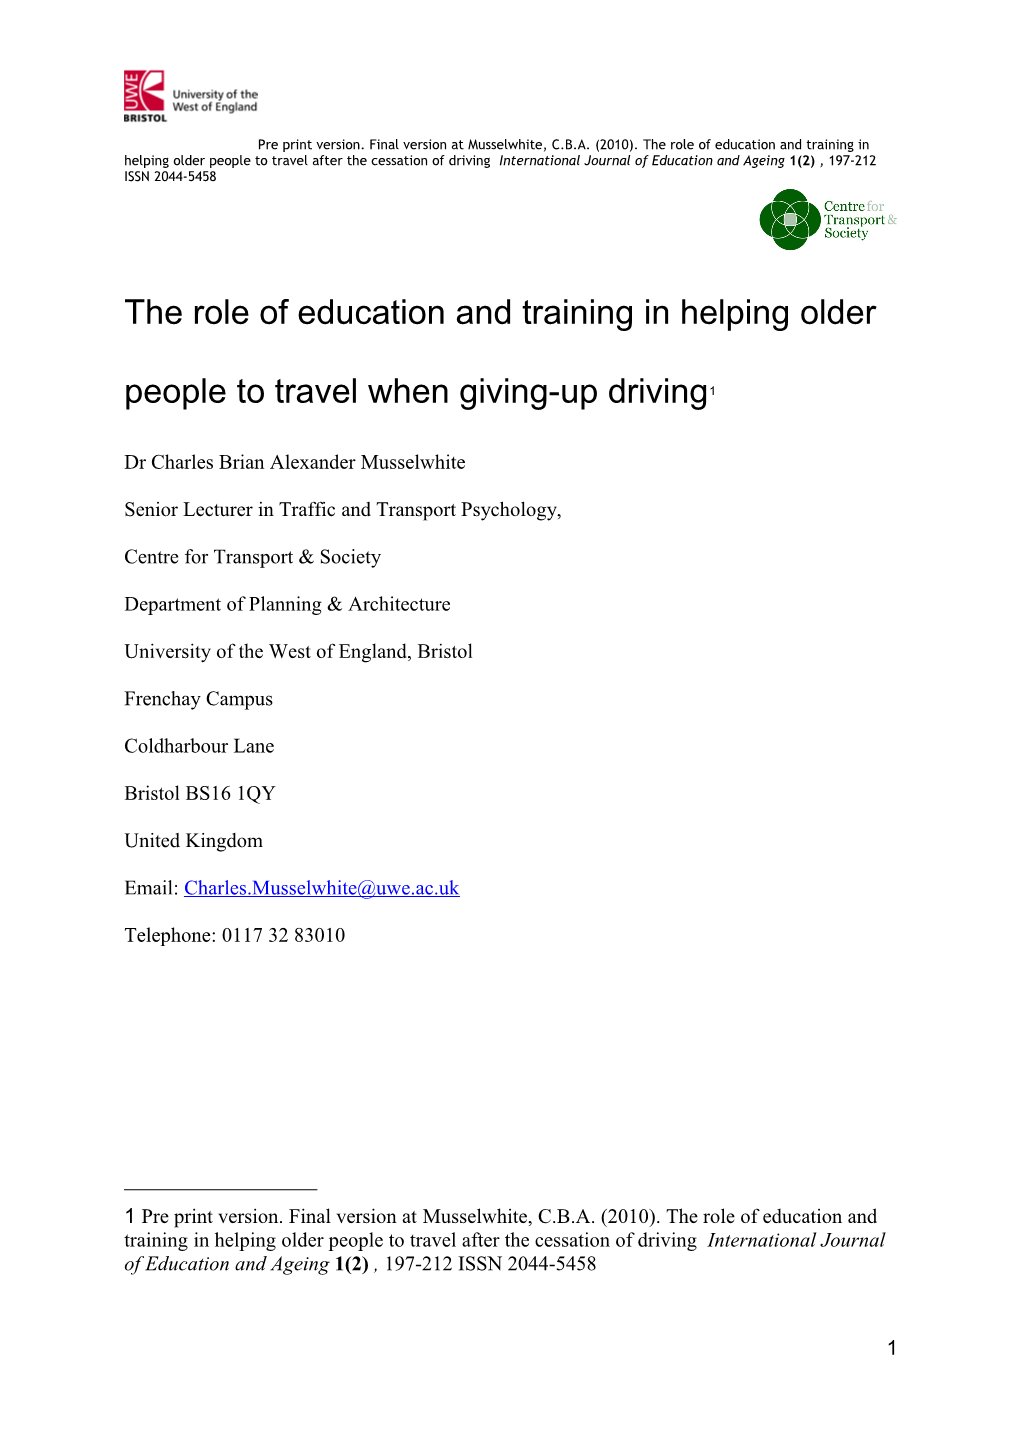 The Role of Education and Training in Helping Older People to Travel When Giving-Up Driving 1